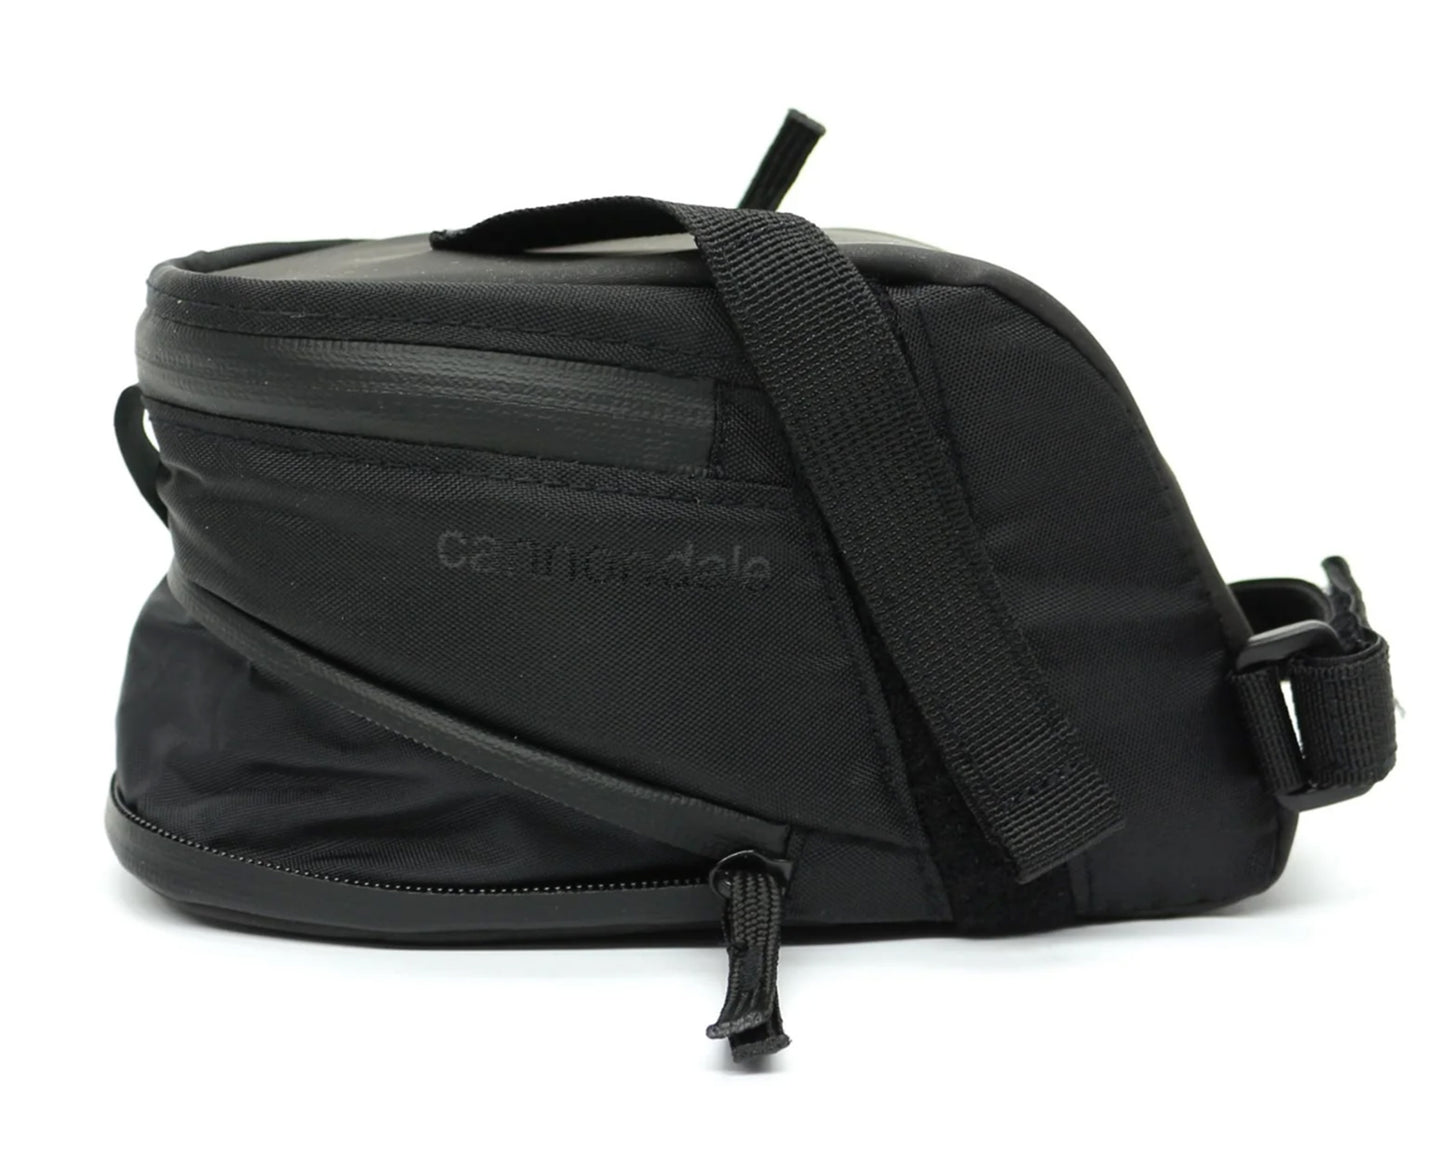 Cannondale Contain Stitched Velcro Bag Blk LG